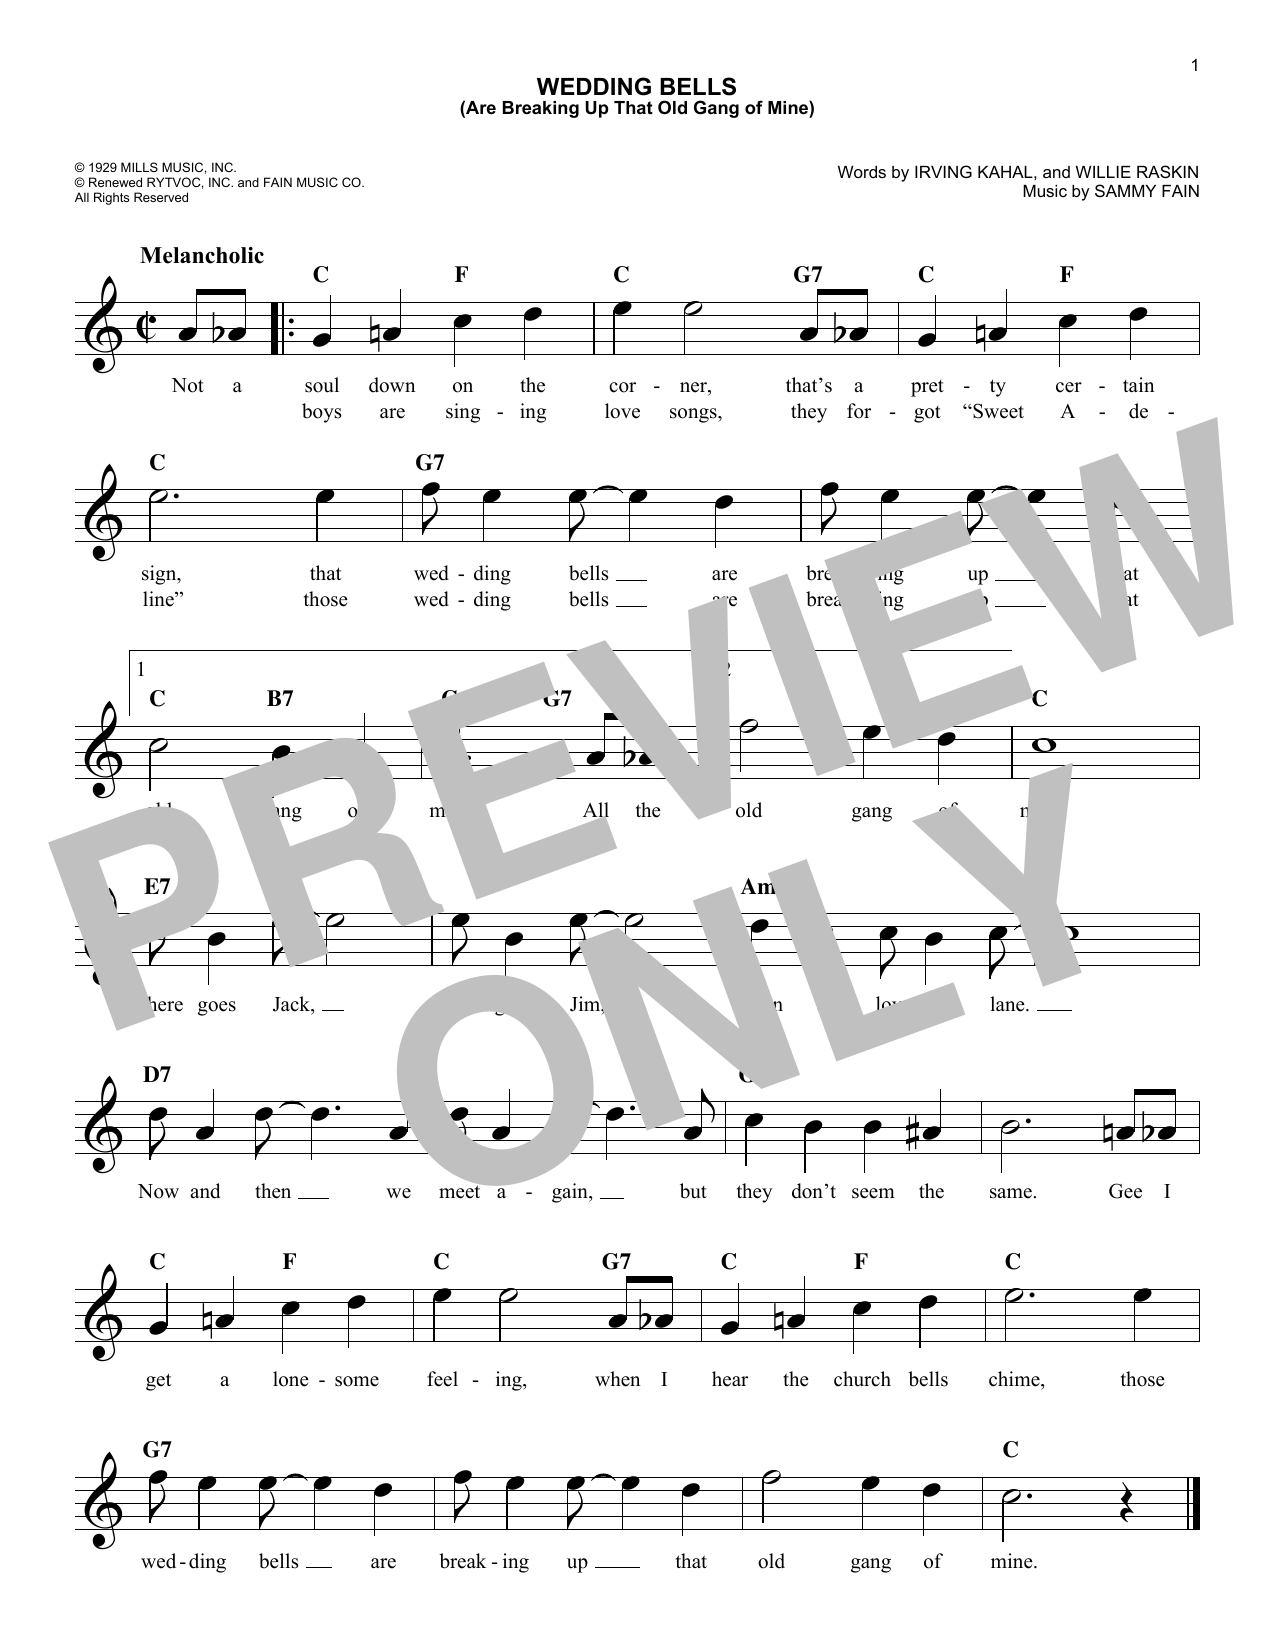 Download Willie Raskin Wedding Bells (Are Breaking Up That Old Sheet Music